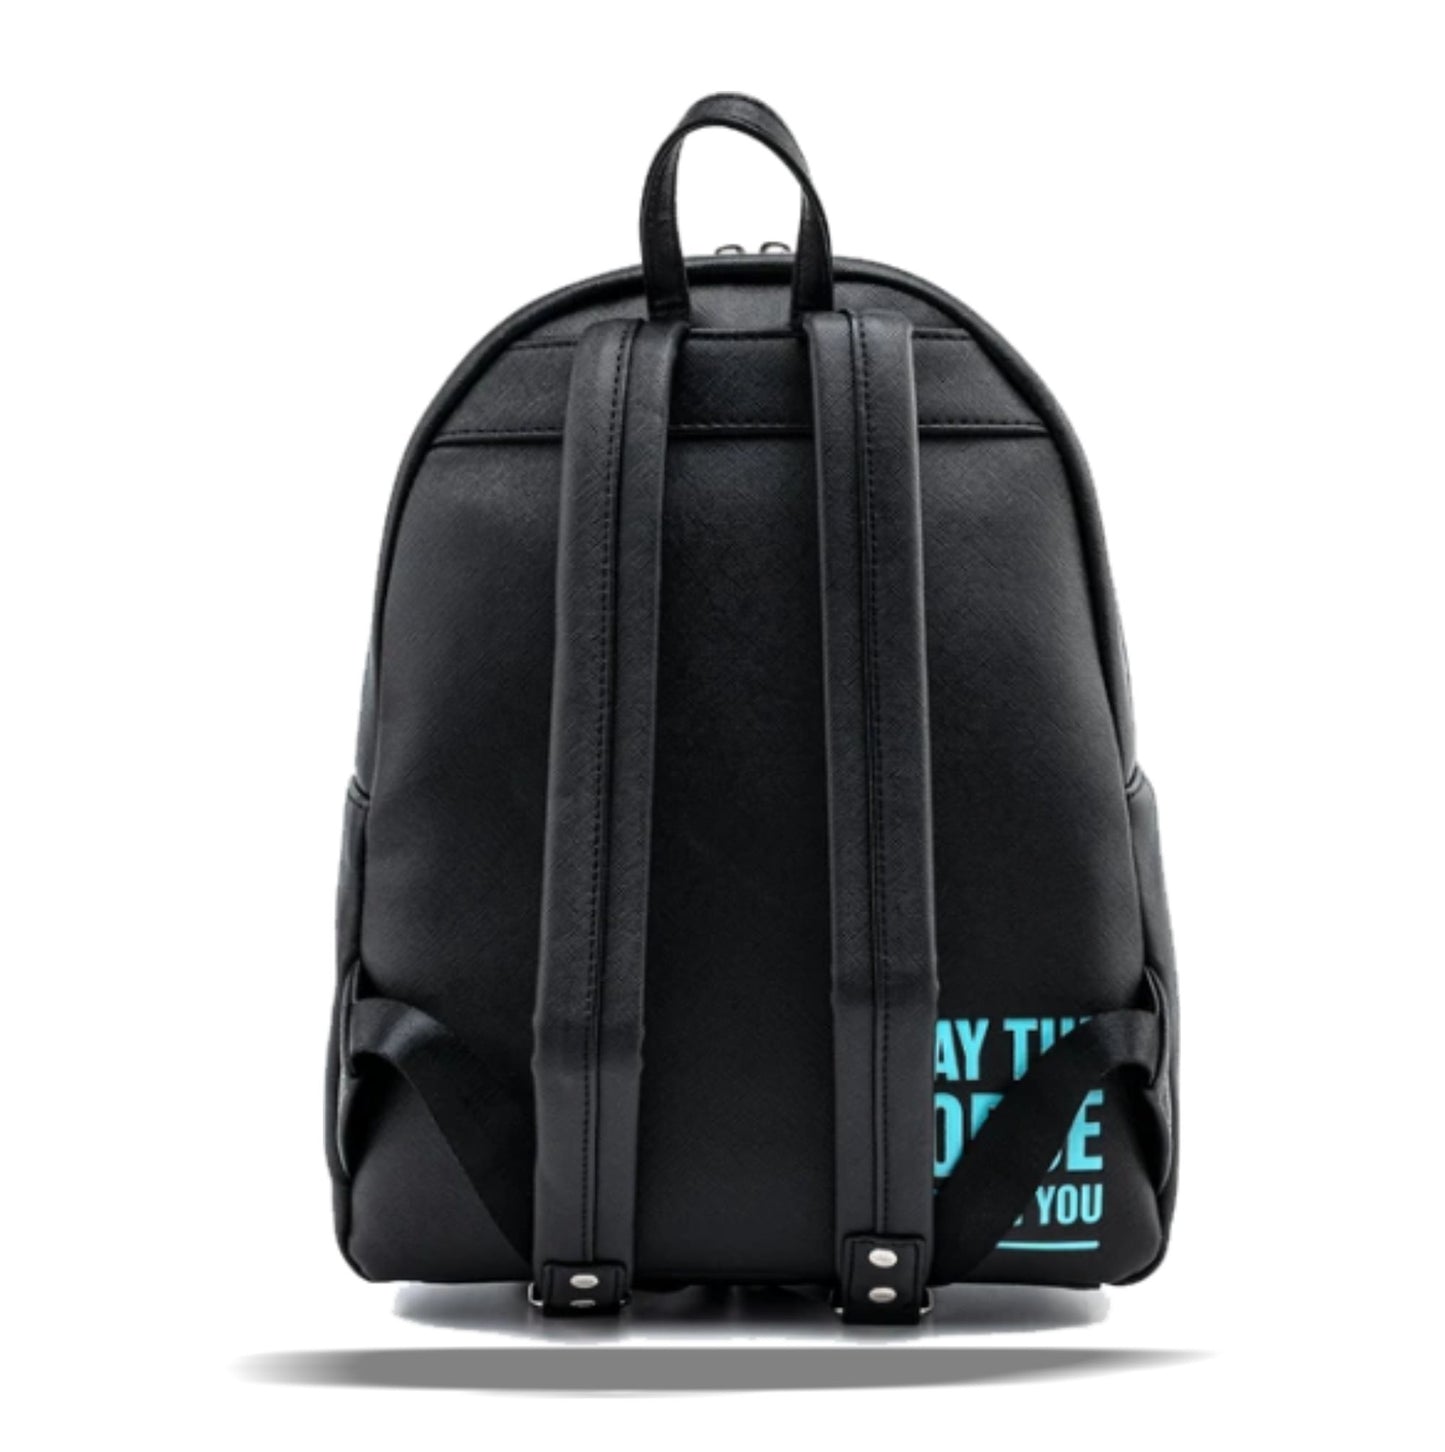 Loungefly x Star Wars May The Force Be With You Mini Backpack